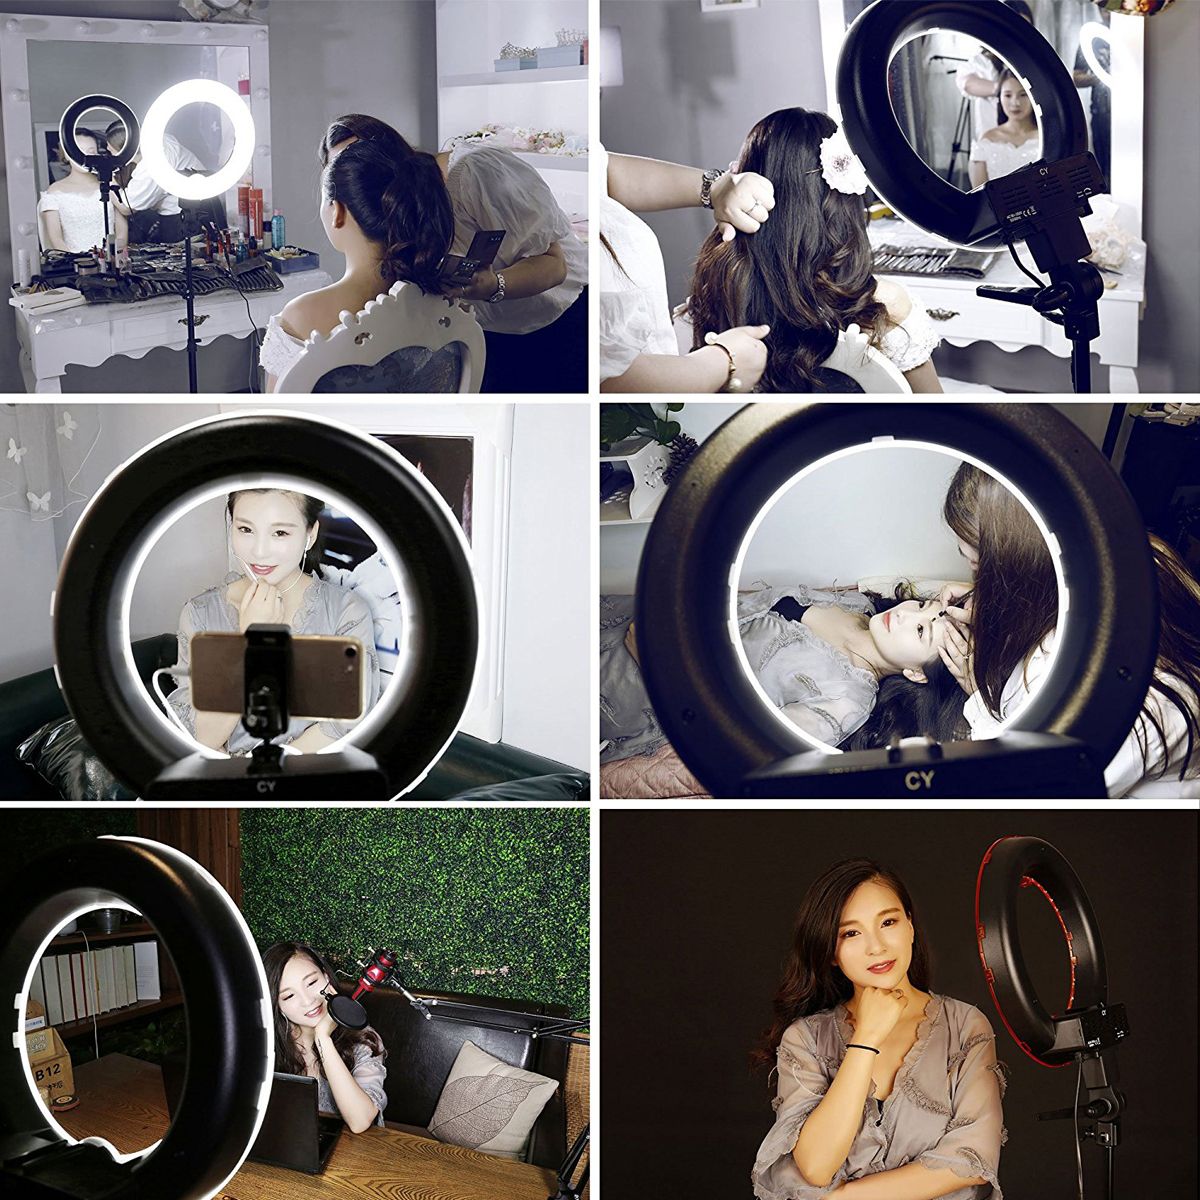 16cm-LED-Video-Ring-Light-5500K-Dimmable-with-160cm-Adjustable-Light-Stand-for-Youtube-Tiktok-Live-S-1403937